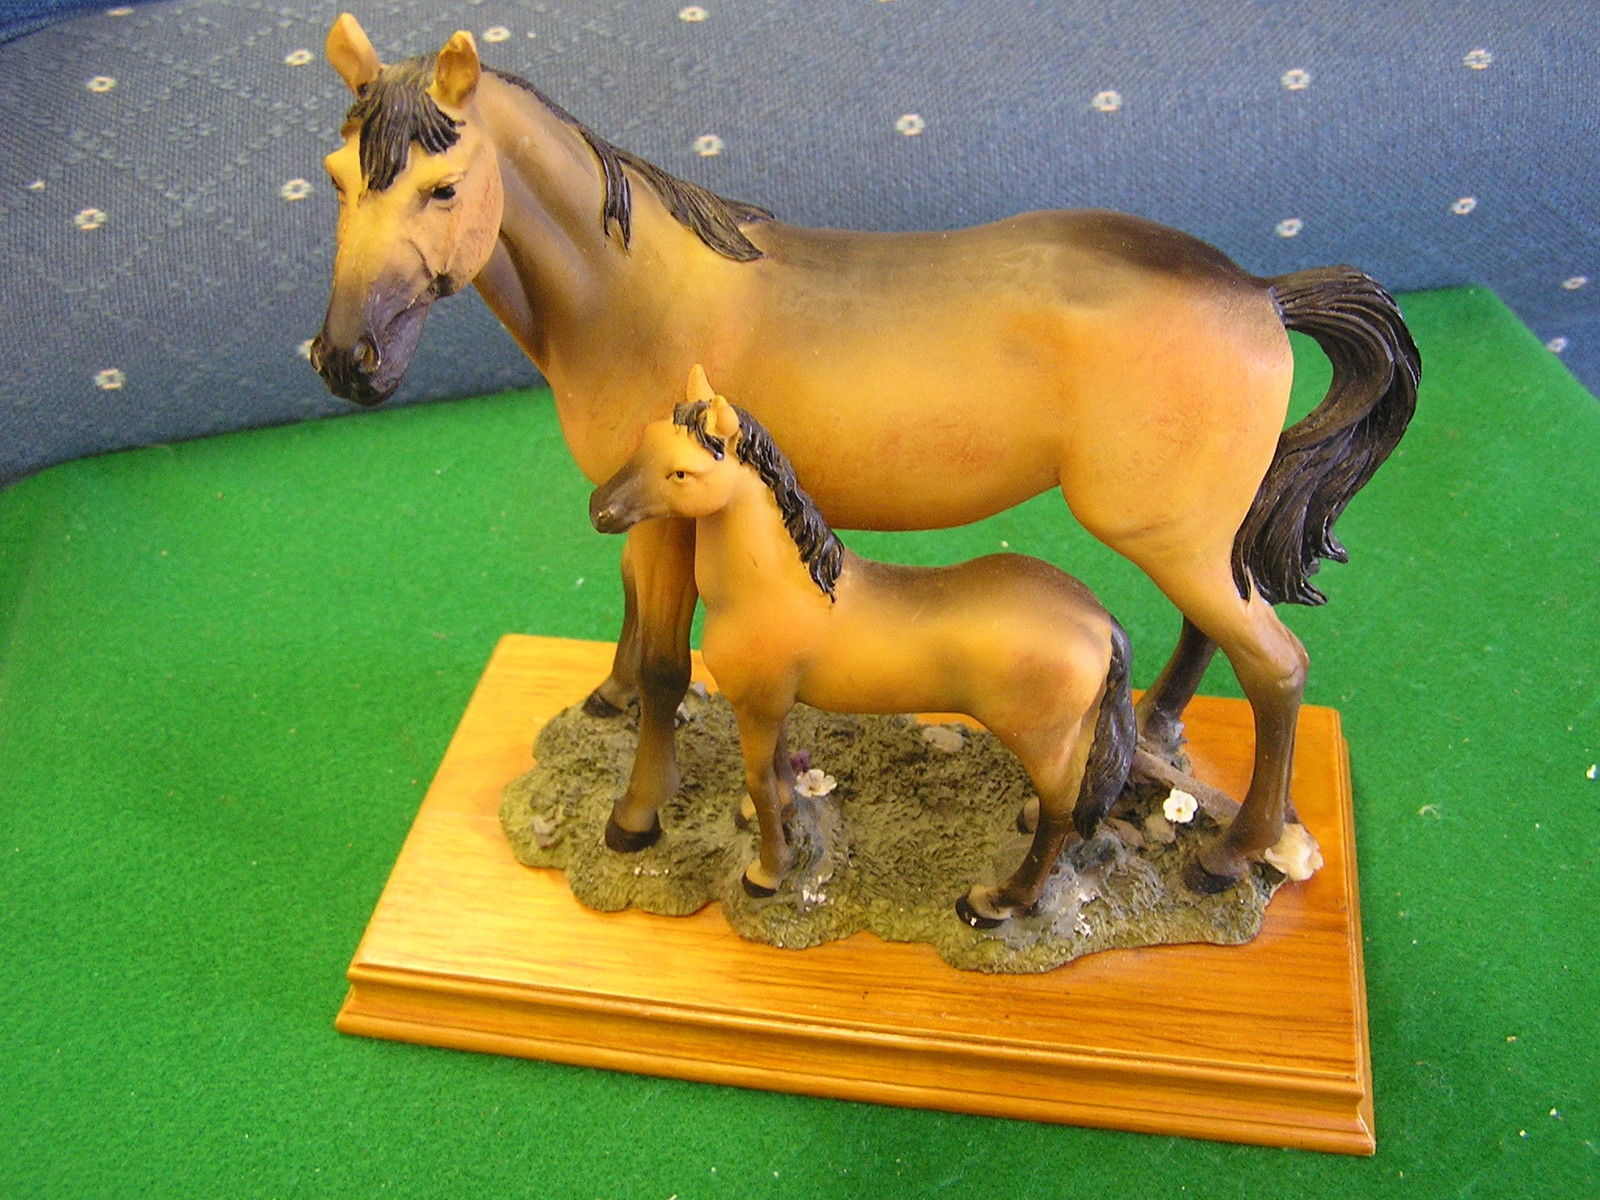 Beautiful HORSE Statue on Wood Base......"Mother and Foal"..................SALE - $19.80